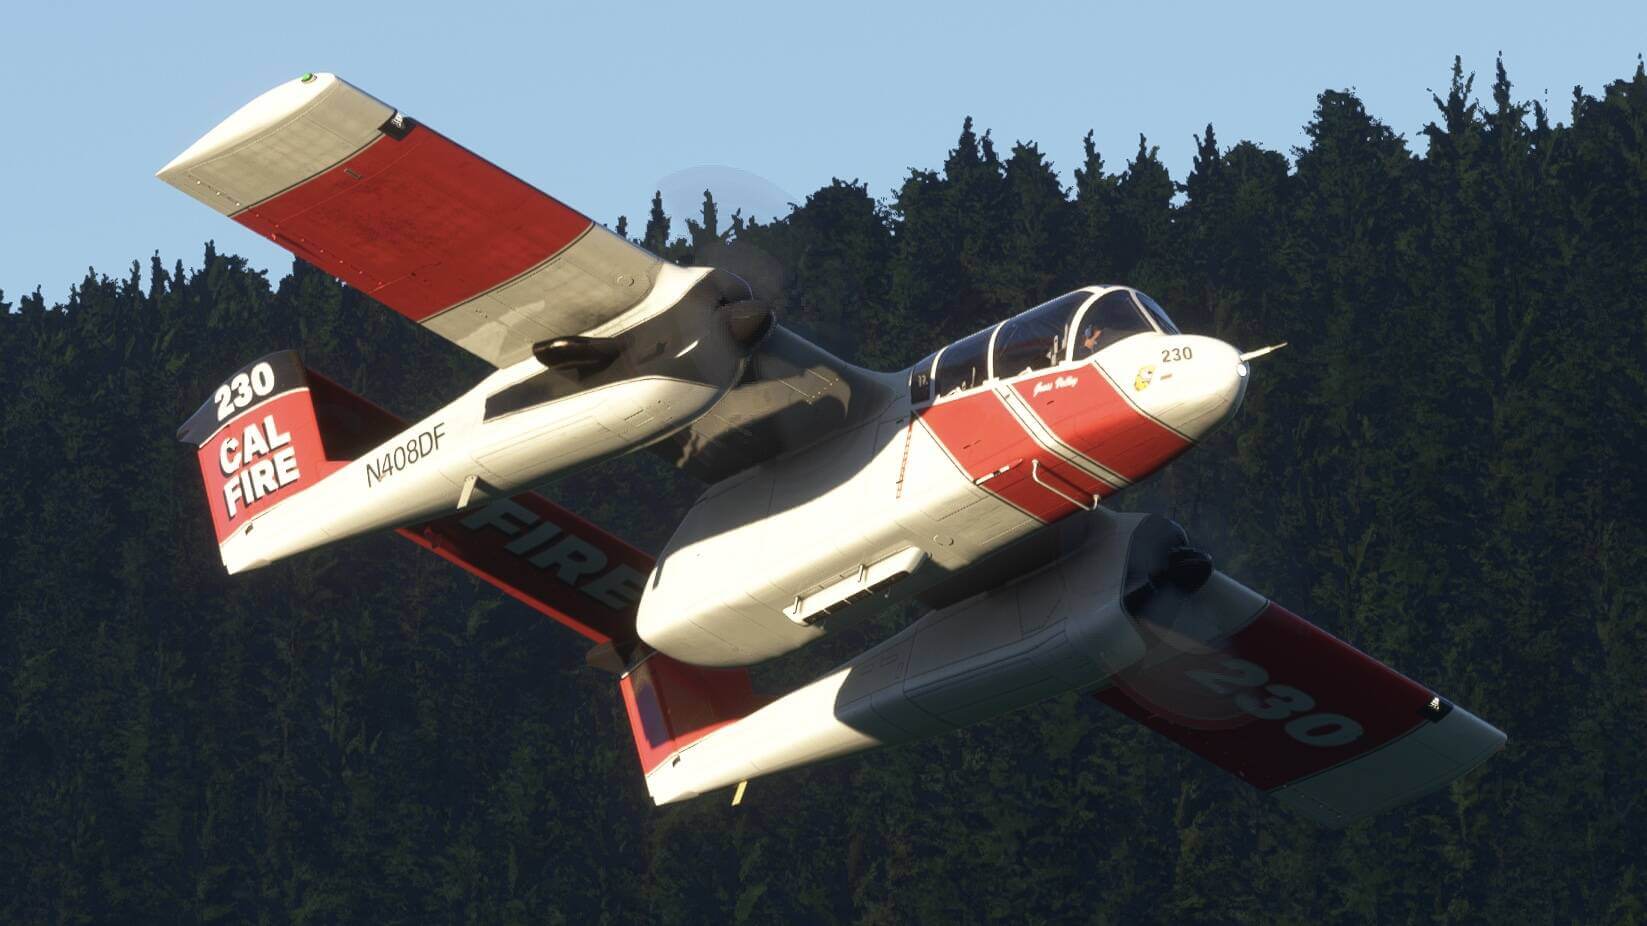 The OV-10 Bronco in white and red striped livery climbs out on departure with high trees in the background